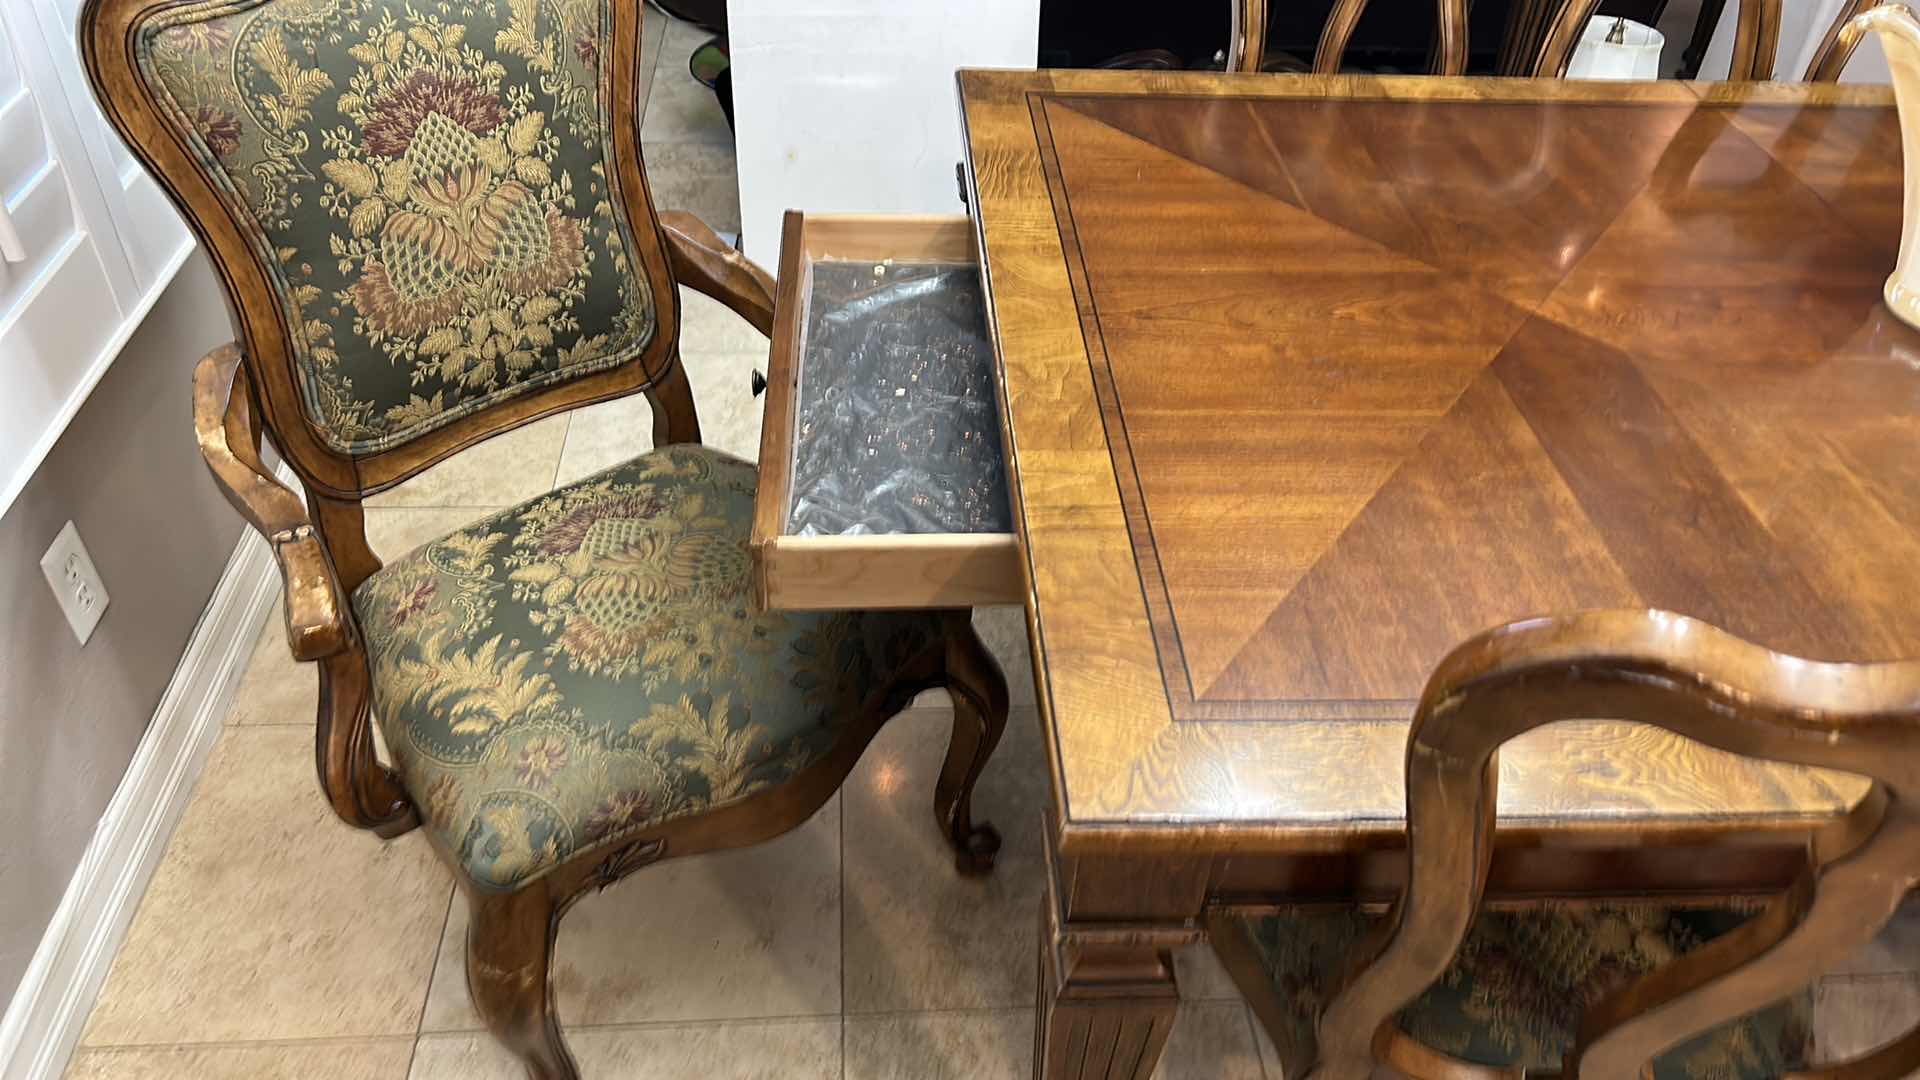 Photo 14 of ETHAN ALLEN RECTANGLE DINING TABLE 46” x 72” x 30” SERIAL NO 67514 $1499 CHAIRS $2741 - HAS TWO LEAFS